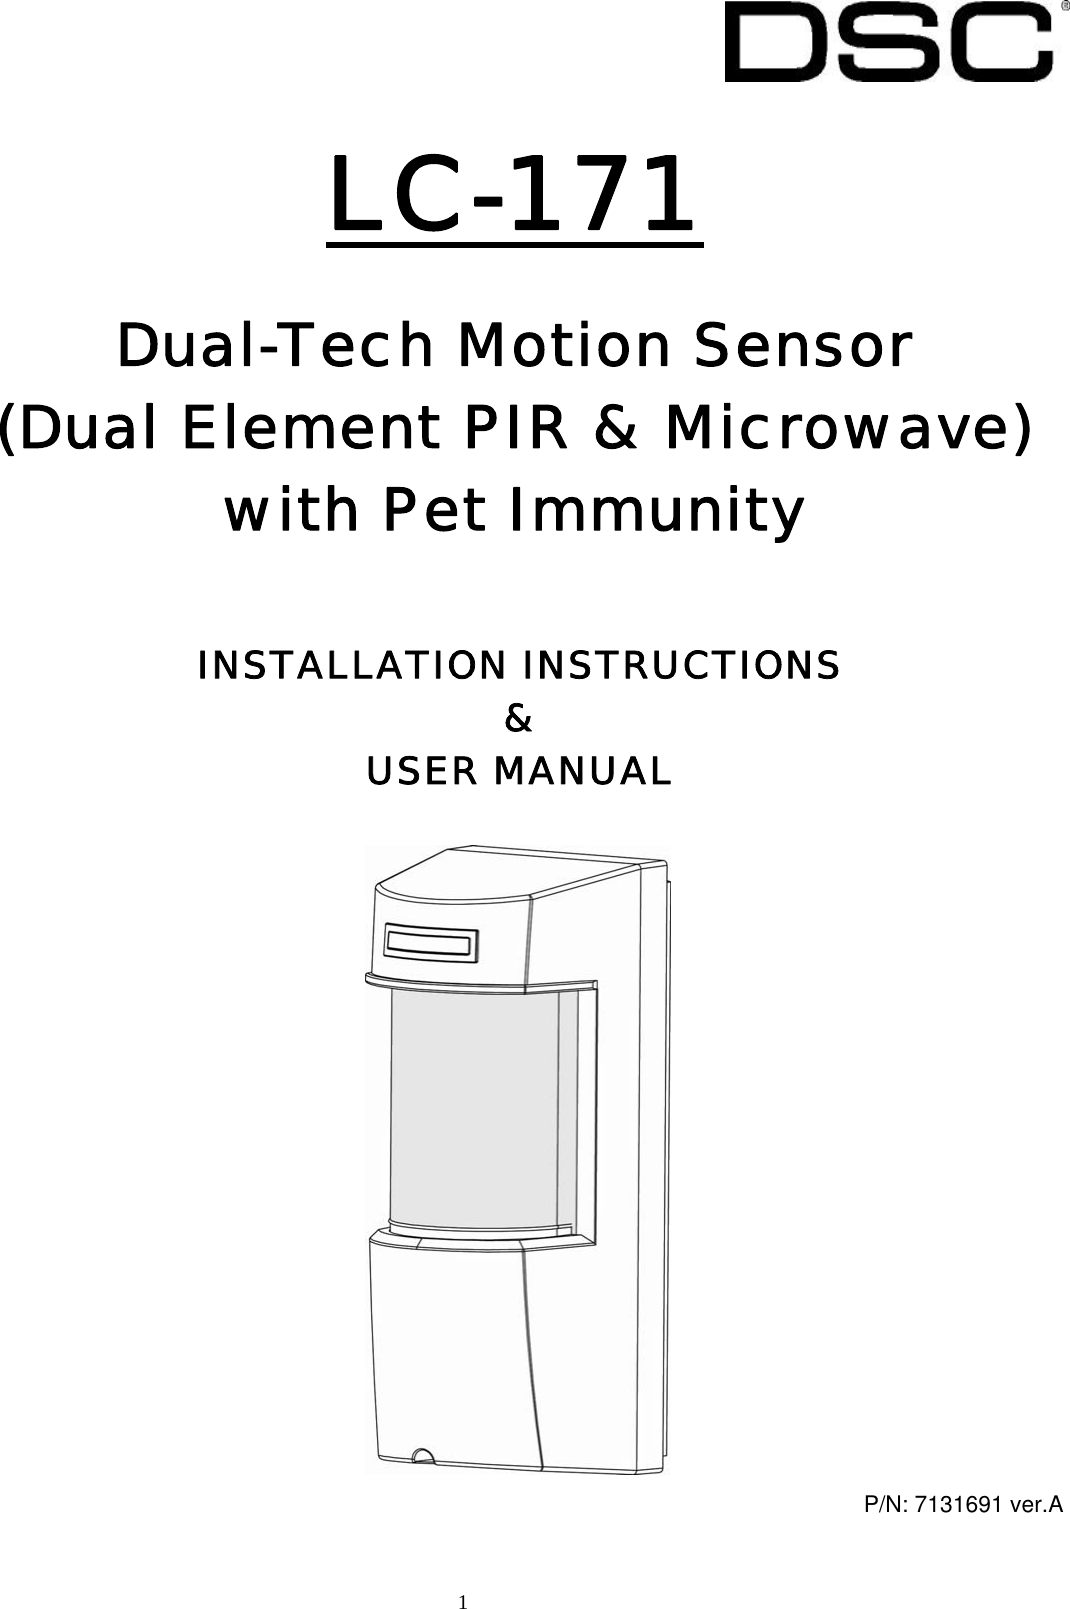  1      INSTALLATION INSTRUCTIONS &amp; USER MANUAL      P/N: 7131691 ver.A  LC-171   Dual-Tech Motion Sensor  (Dual Element PIR &amp; Microwave) with Pet Immunity  